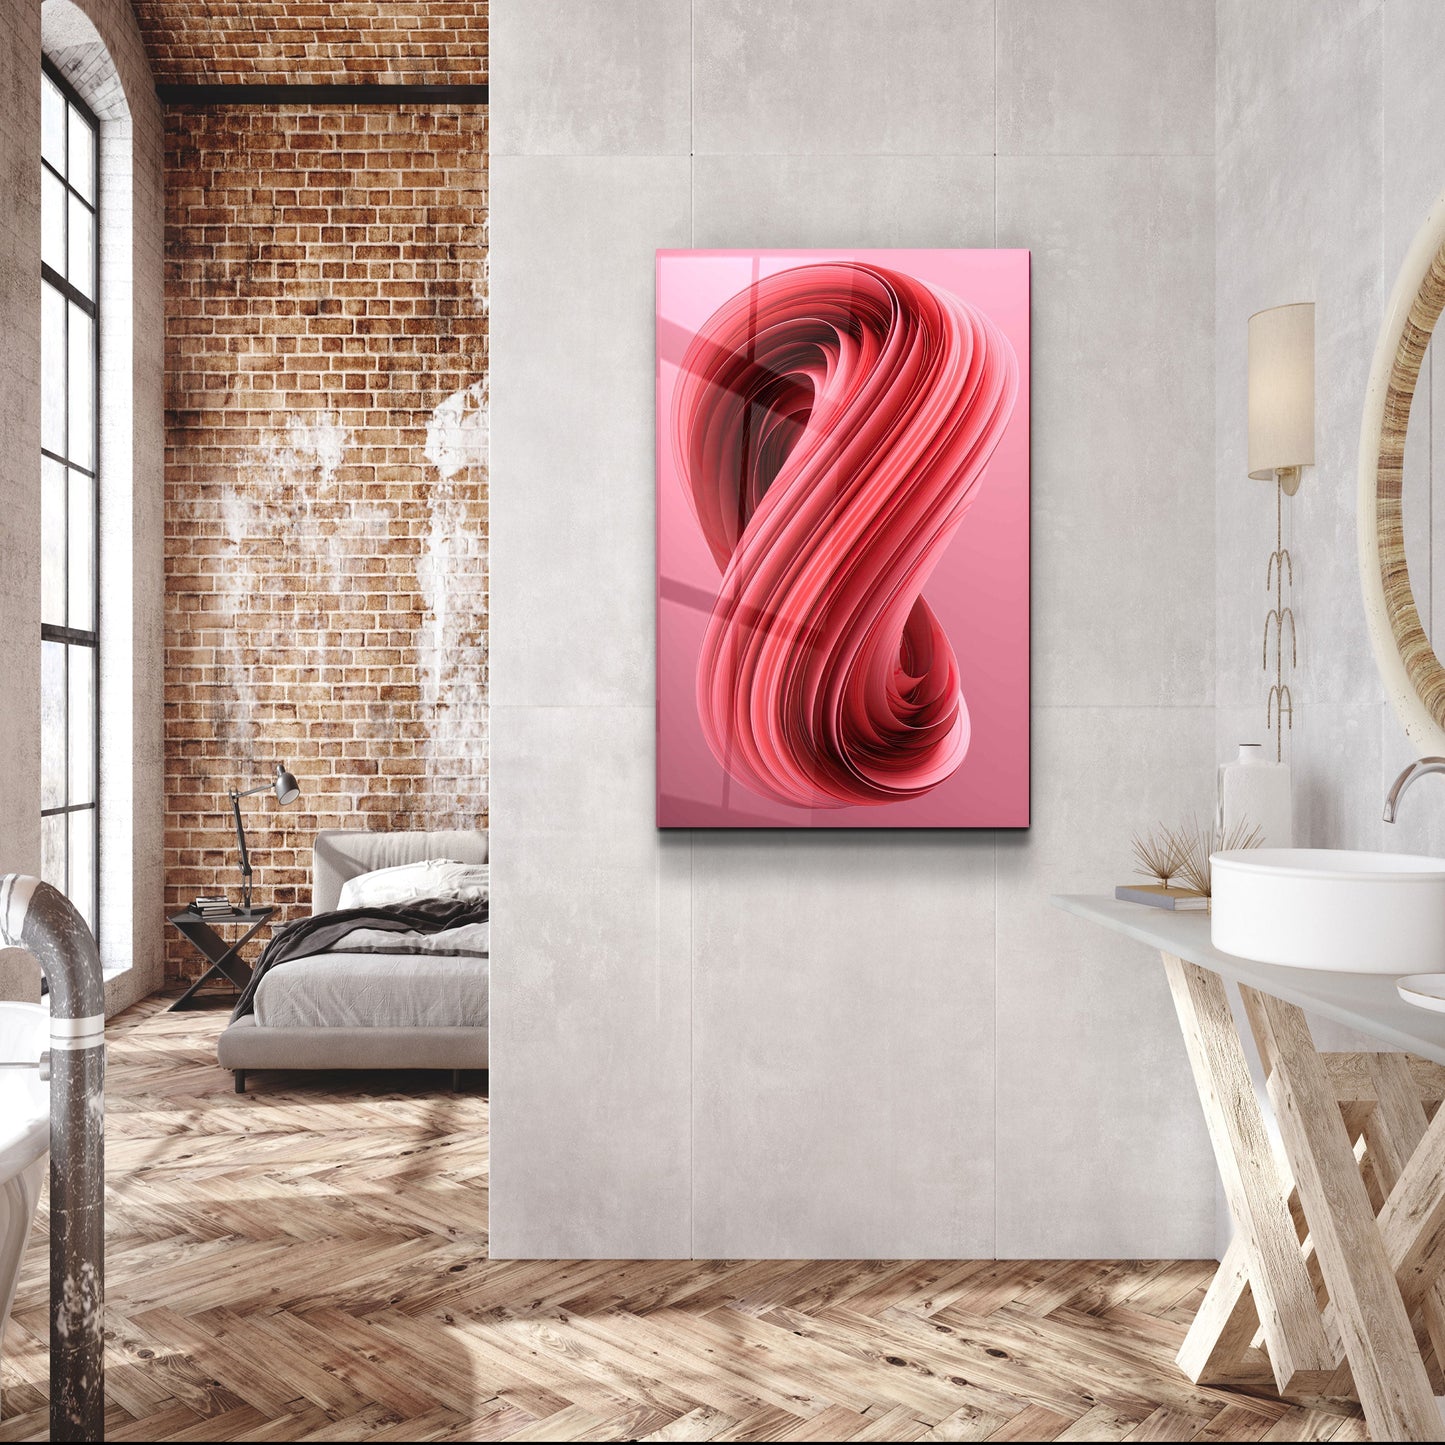 The Eight Senses - Designer's Collection Glass Wall Art